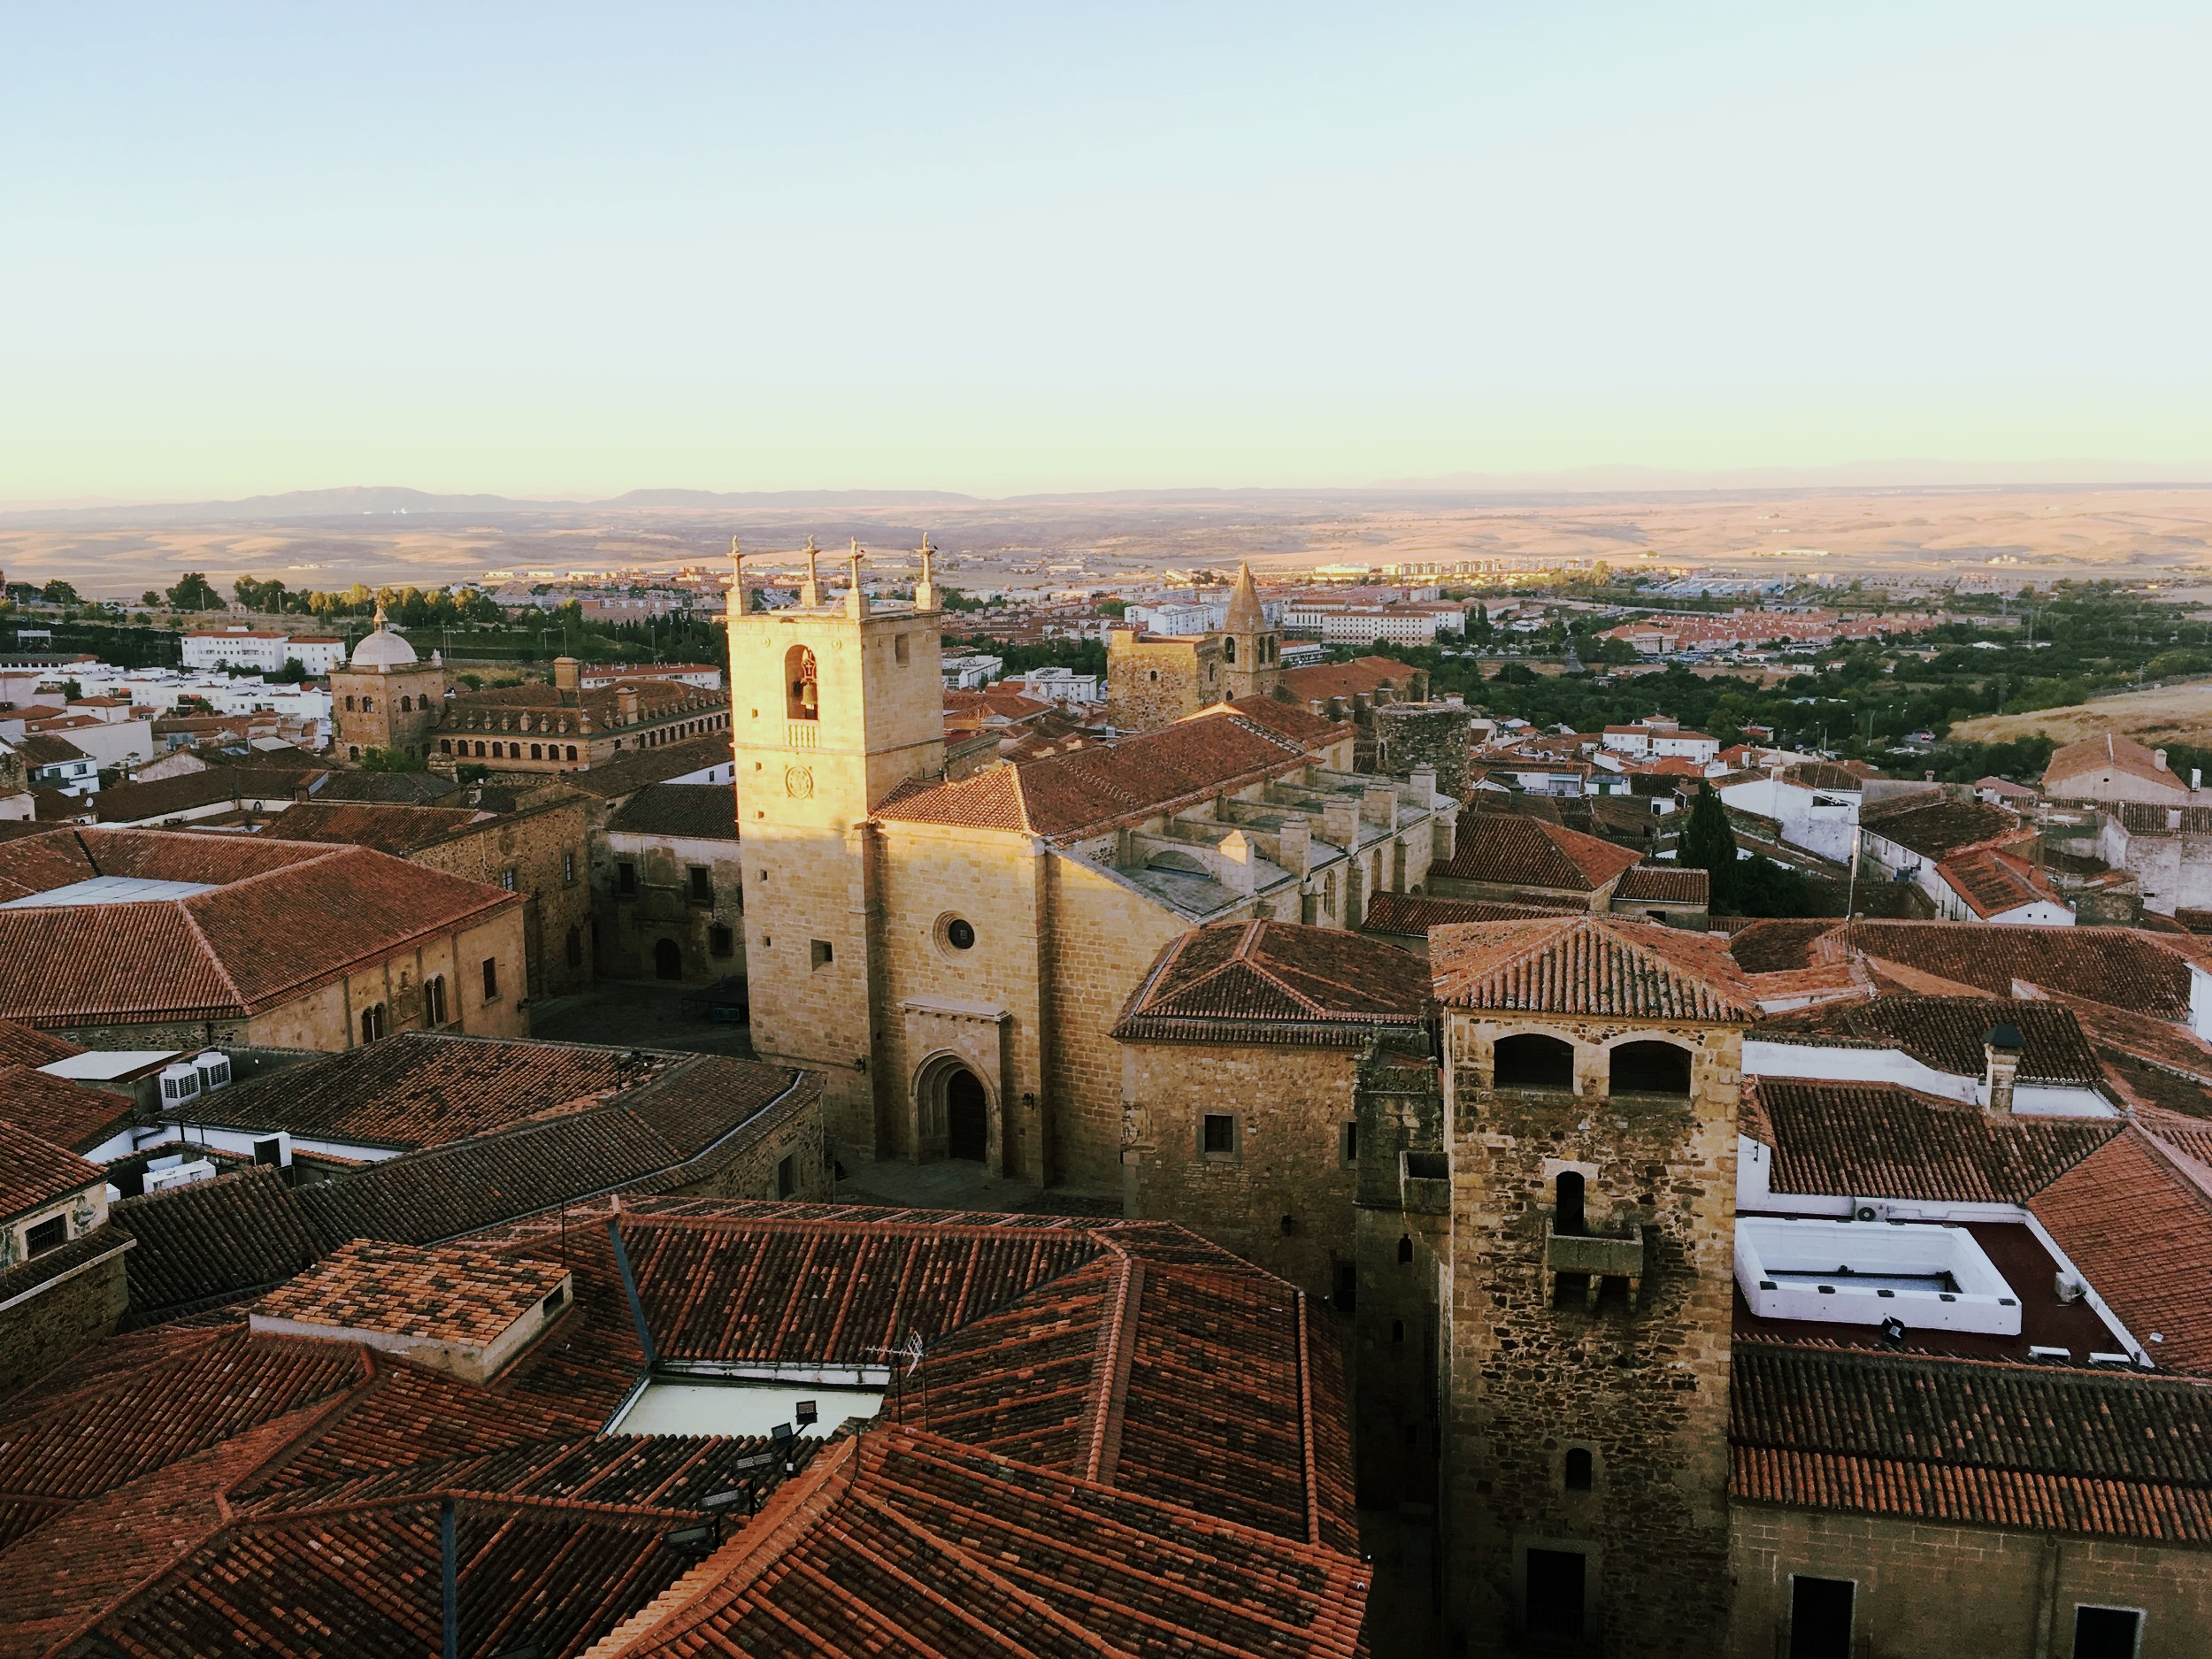 CONDÉ NAST TRAVELER: A Weekend in Cáceres, Spain, the Newest 'Game of Thrones' Filming Location